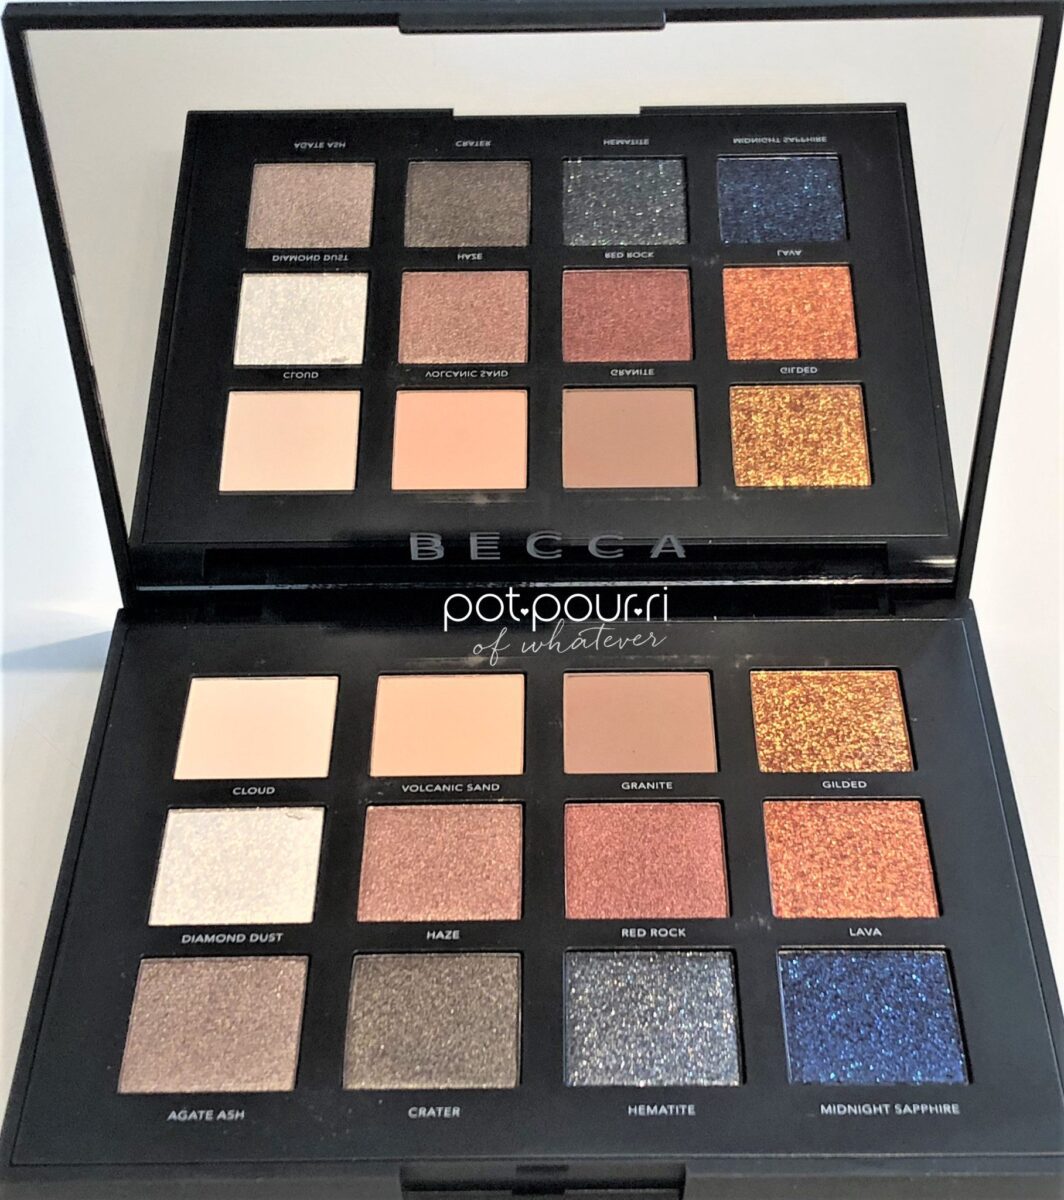 INSIDE THE BECCA VOLCANO GODDESS HOLIDAY EYE SHADOW PALETTE A LARGE SQUARE MIRROR AND 21 EYE SHADOW SHADES